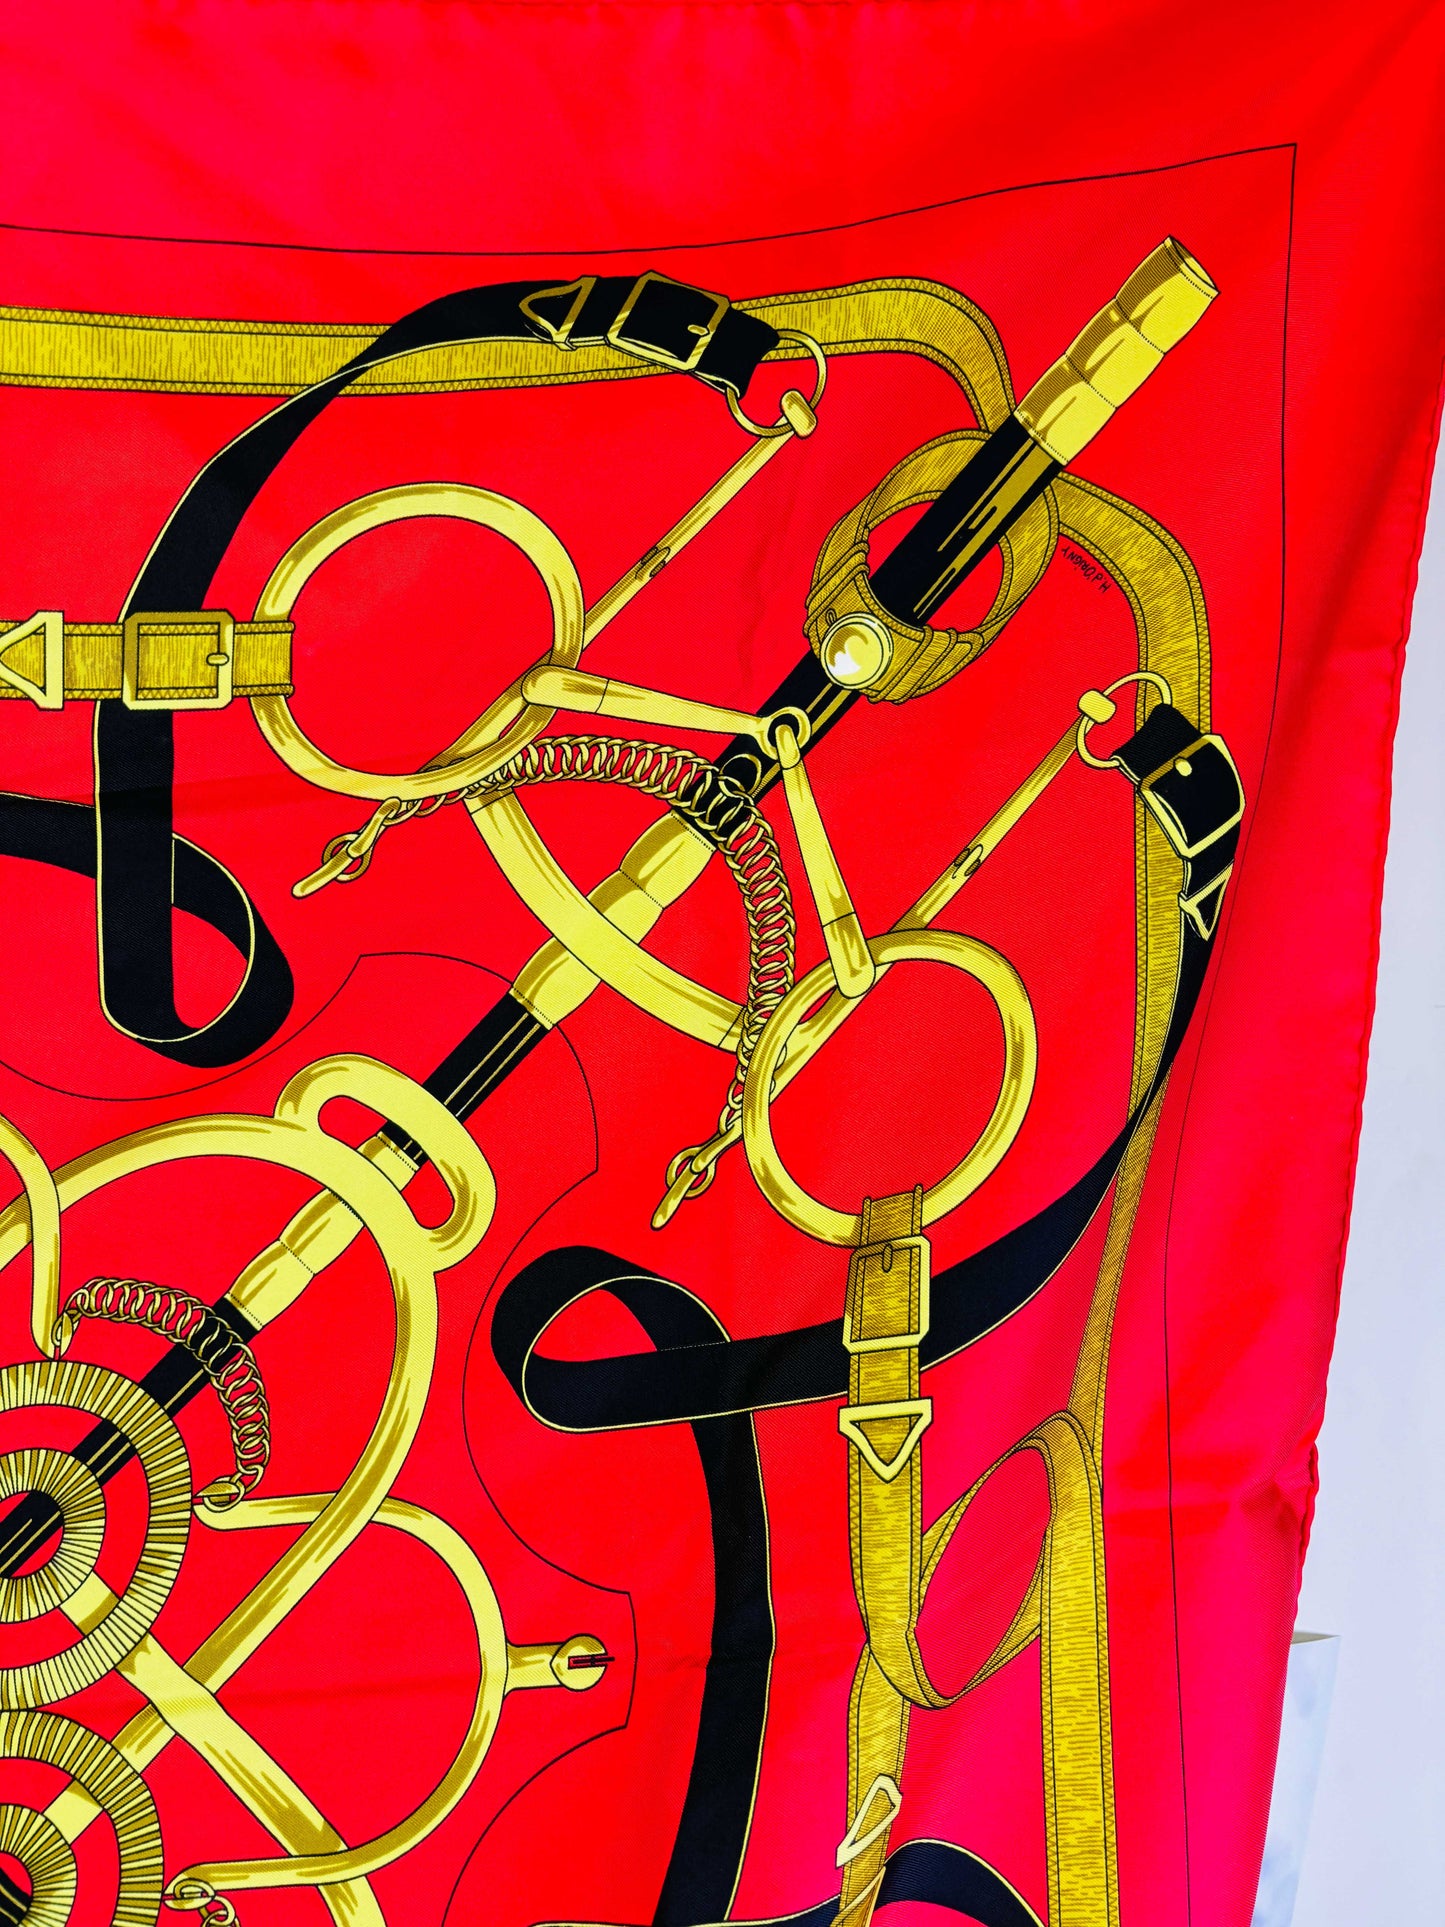 Auth Hermes Scarf Silk Red 90 x 90cm Good cond - 070524